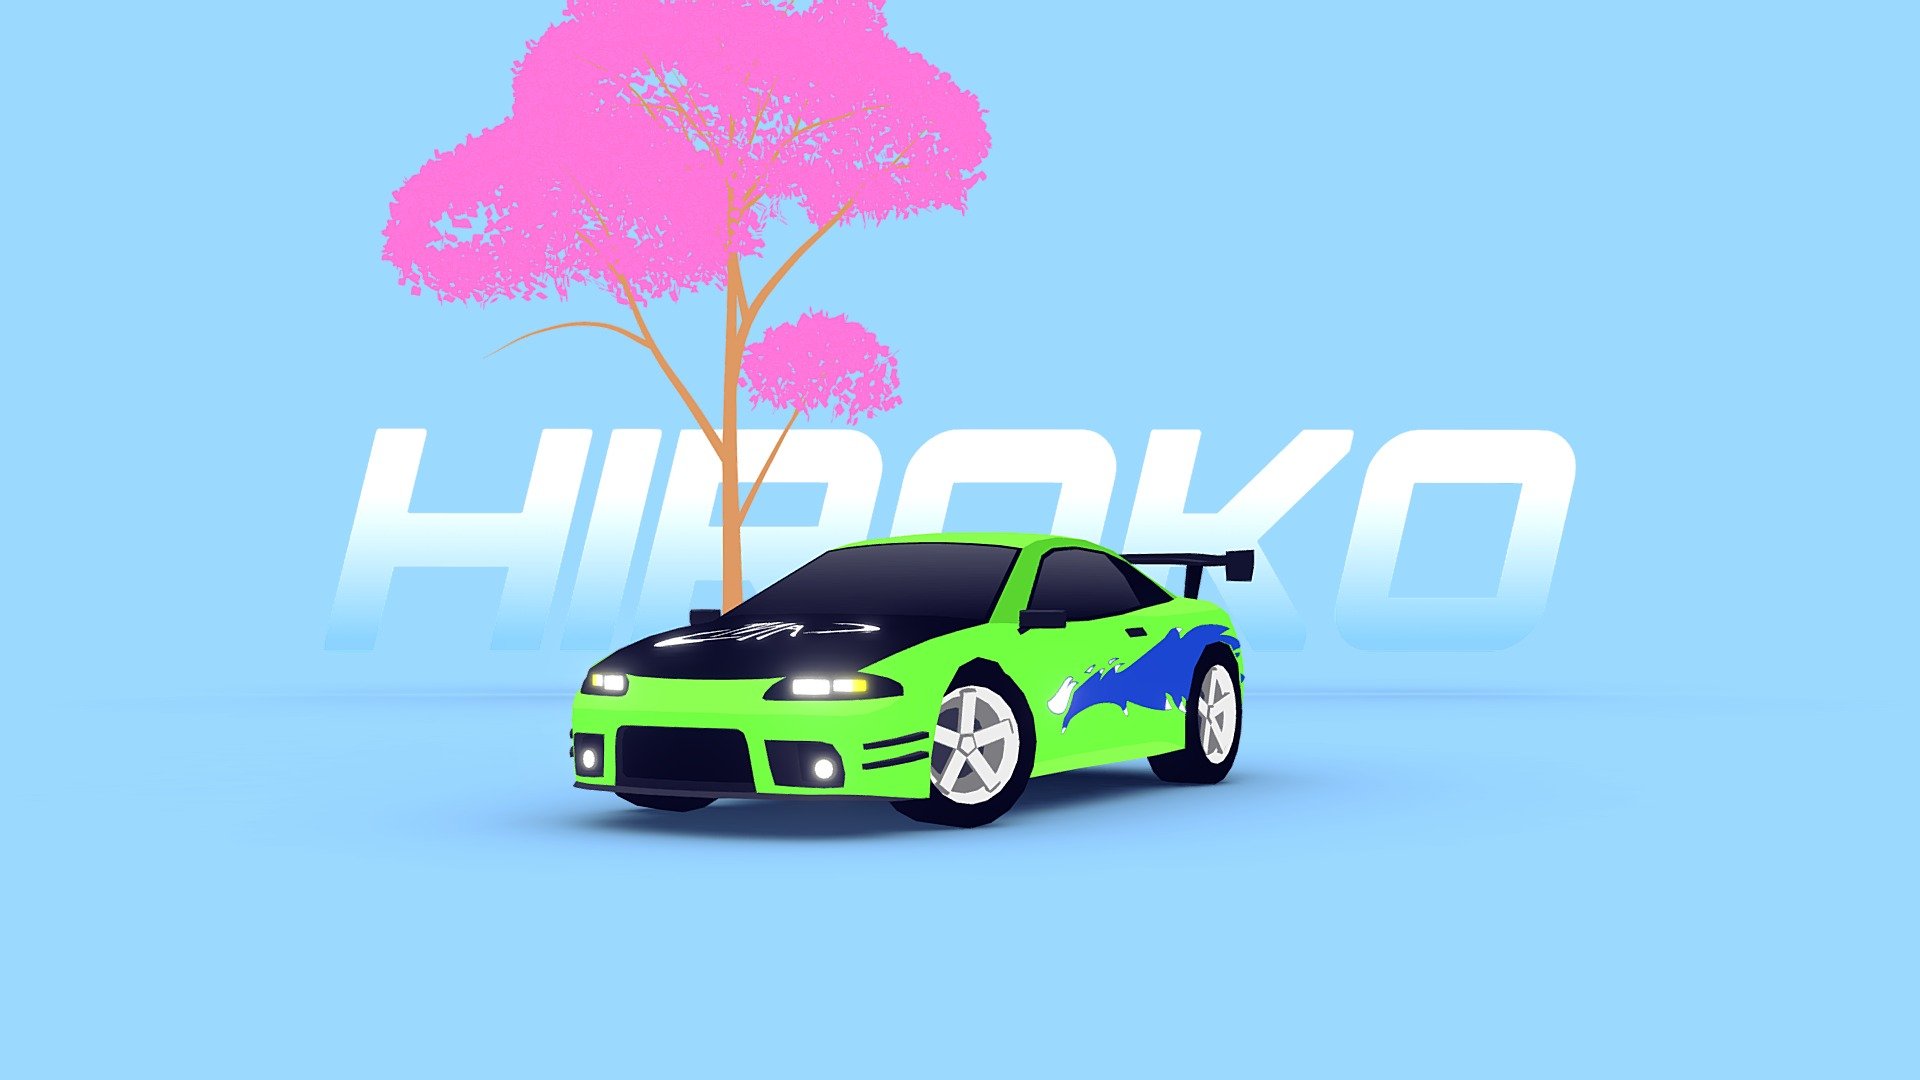 3rd party notice: This model includes a tree made by Aki called Stylized Tree.

This is &ldquo;Hiroko